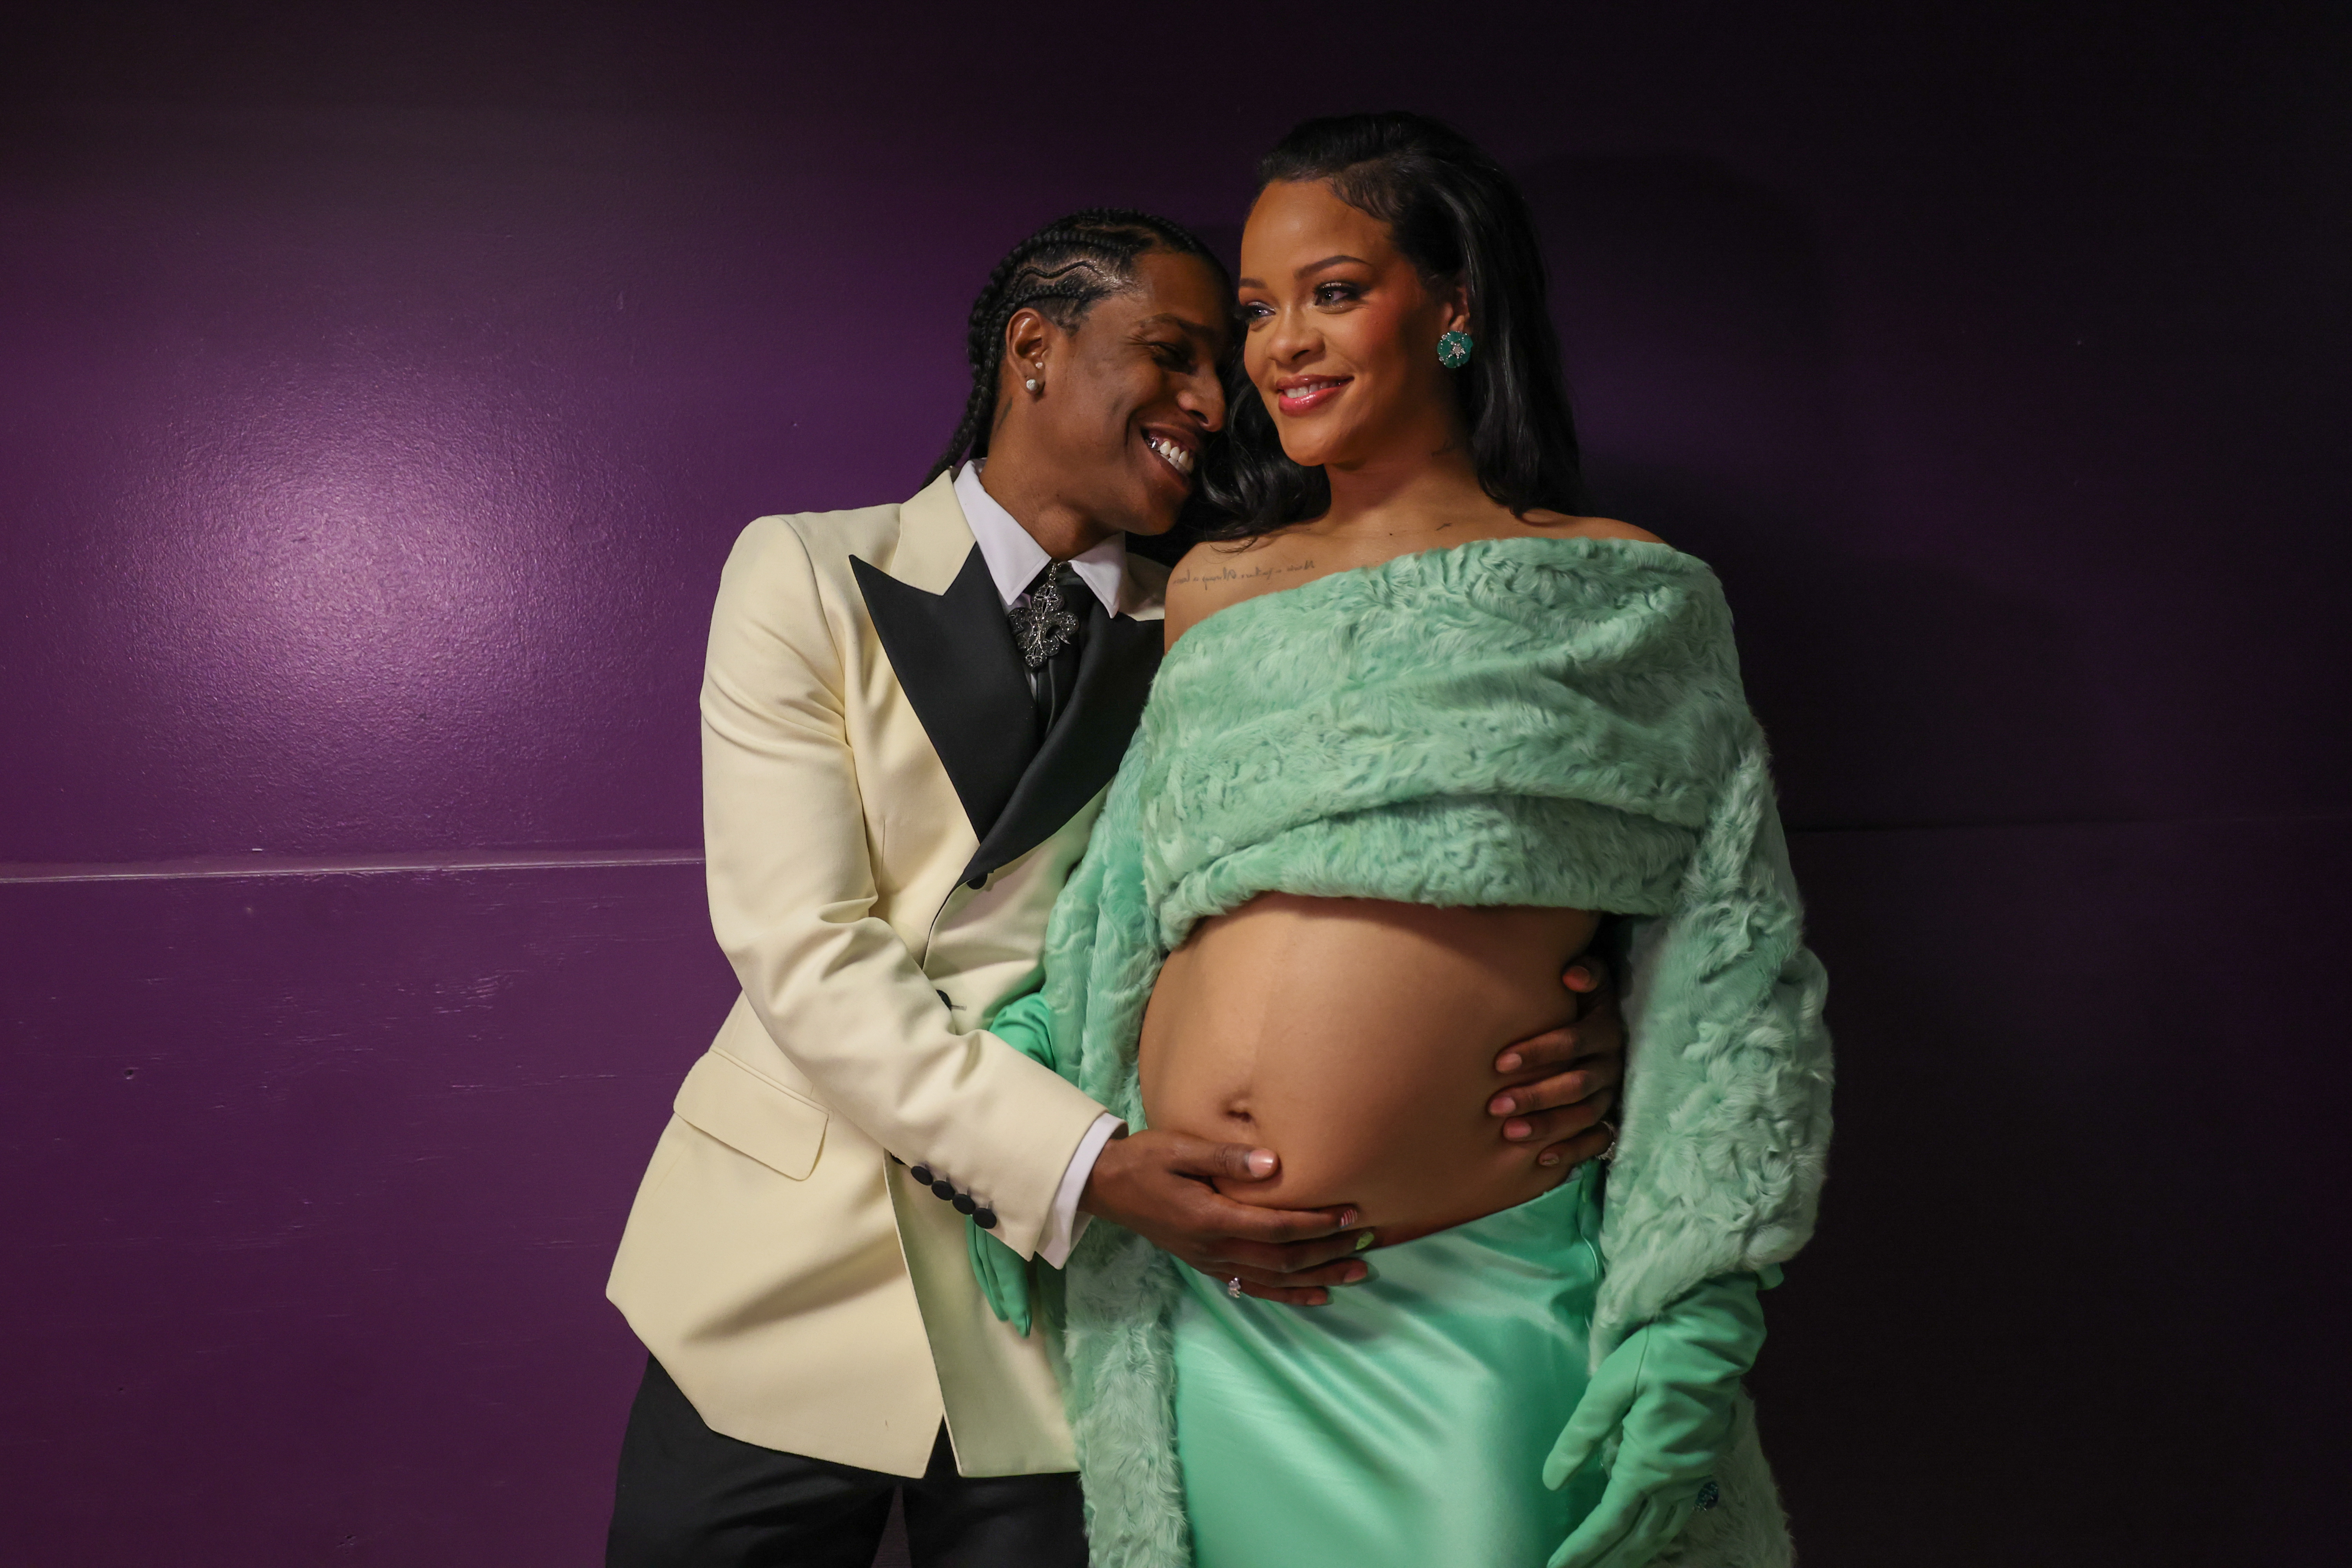 Rihanna and her partner, rapper A$AP Rocky, welcomed their first son, RZA Athelaston, in May 2022 and their second son, 7-month-old Riot Rose, in August 2023